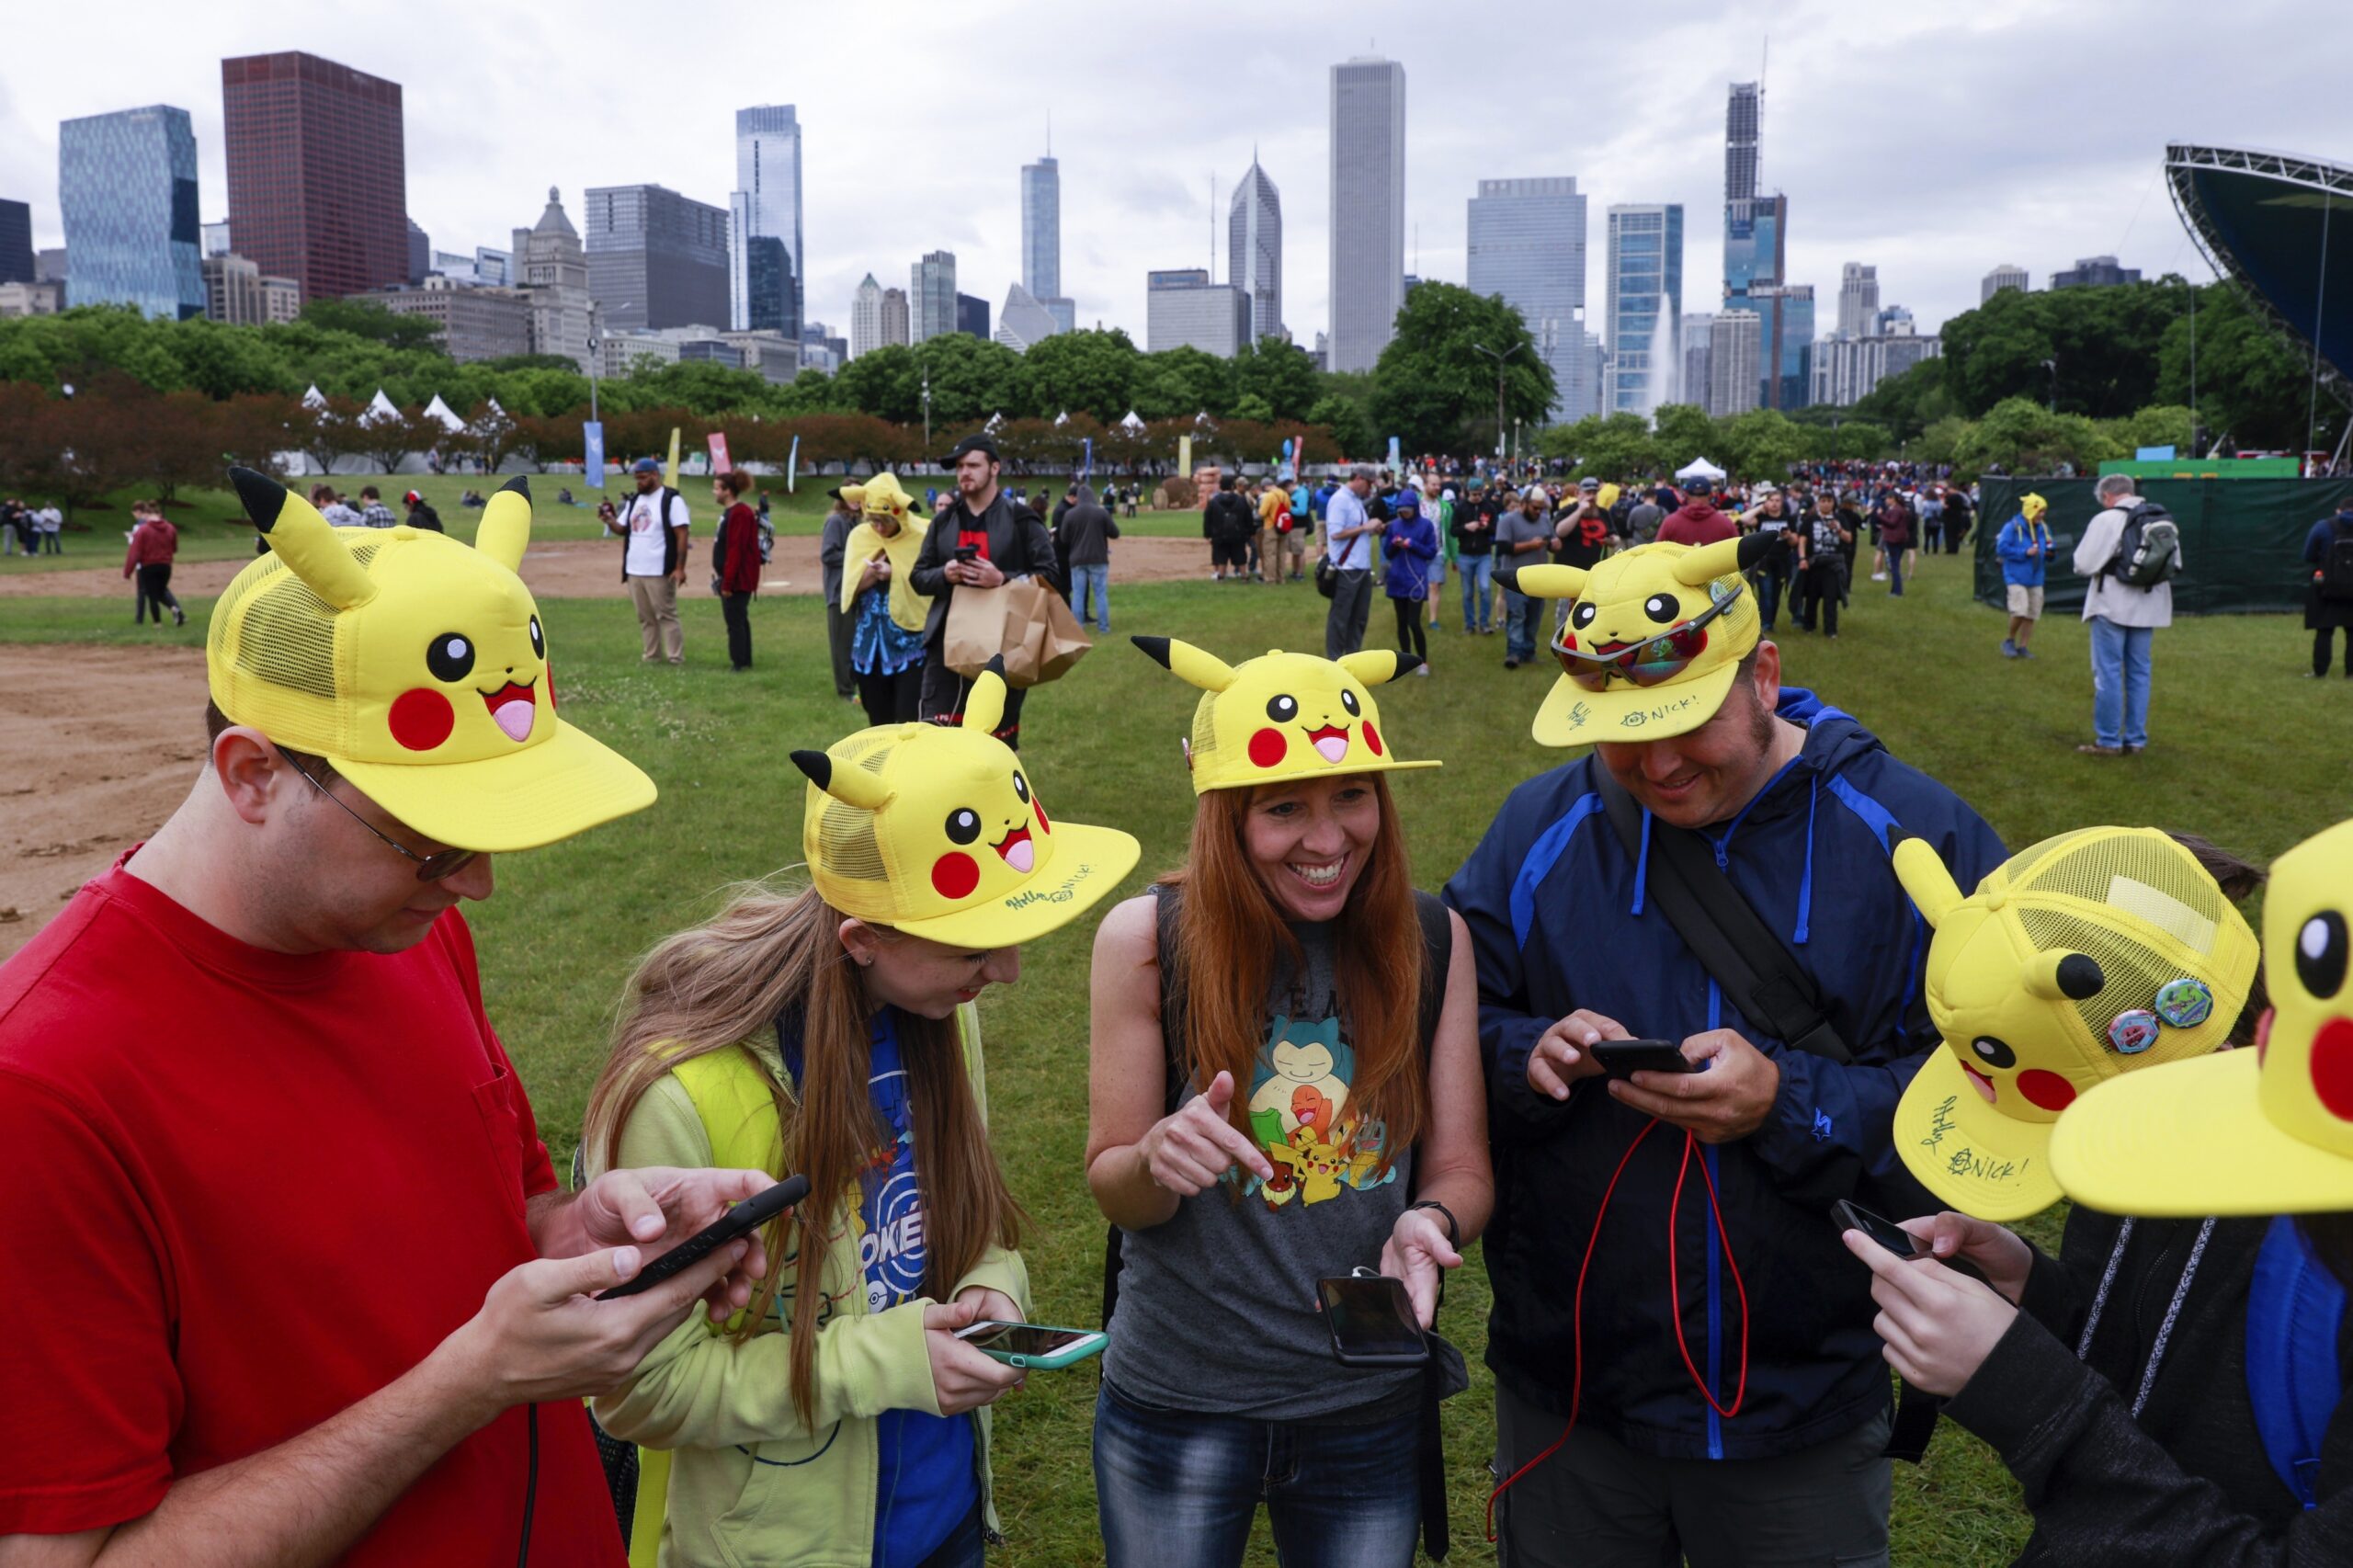 Pokemon Go players at a festival in Chicago